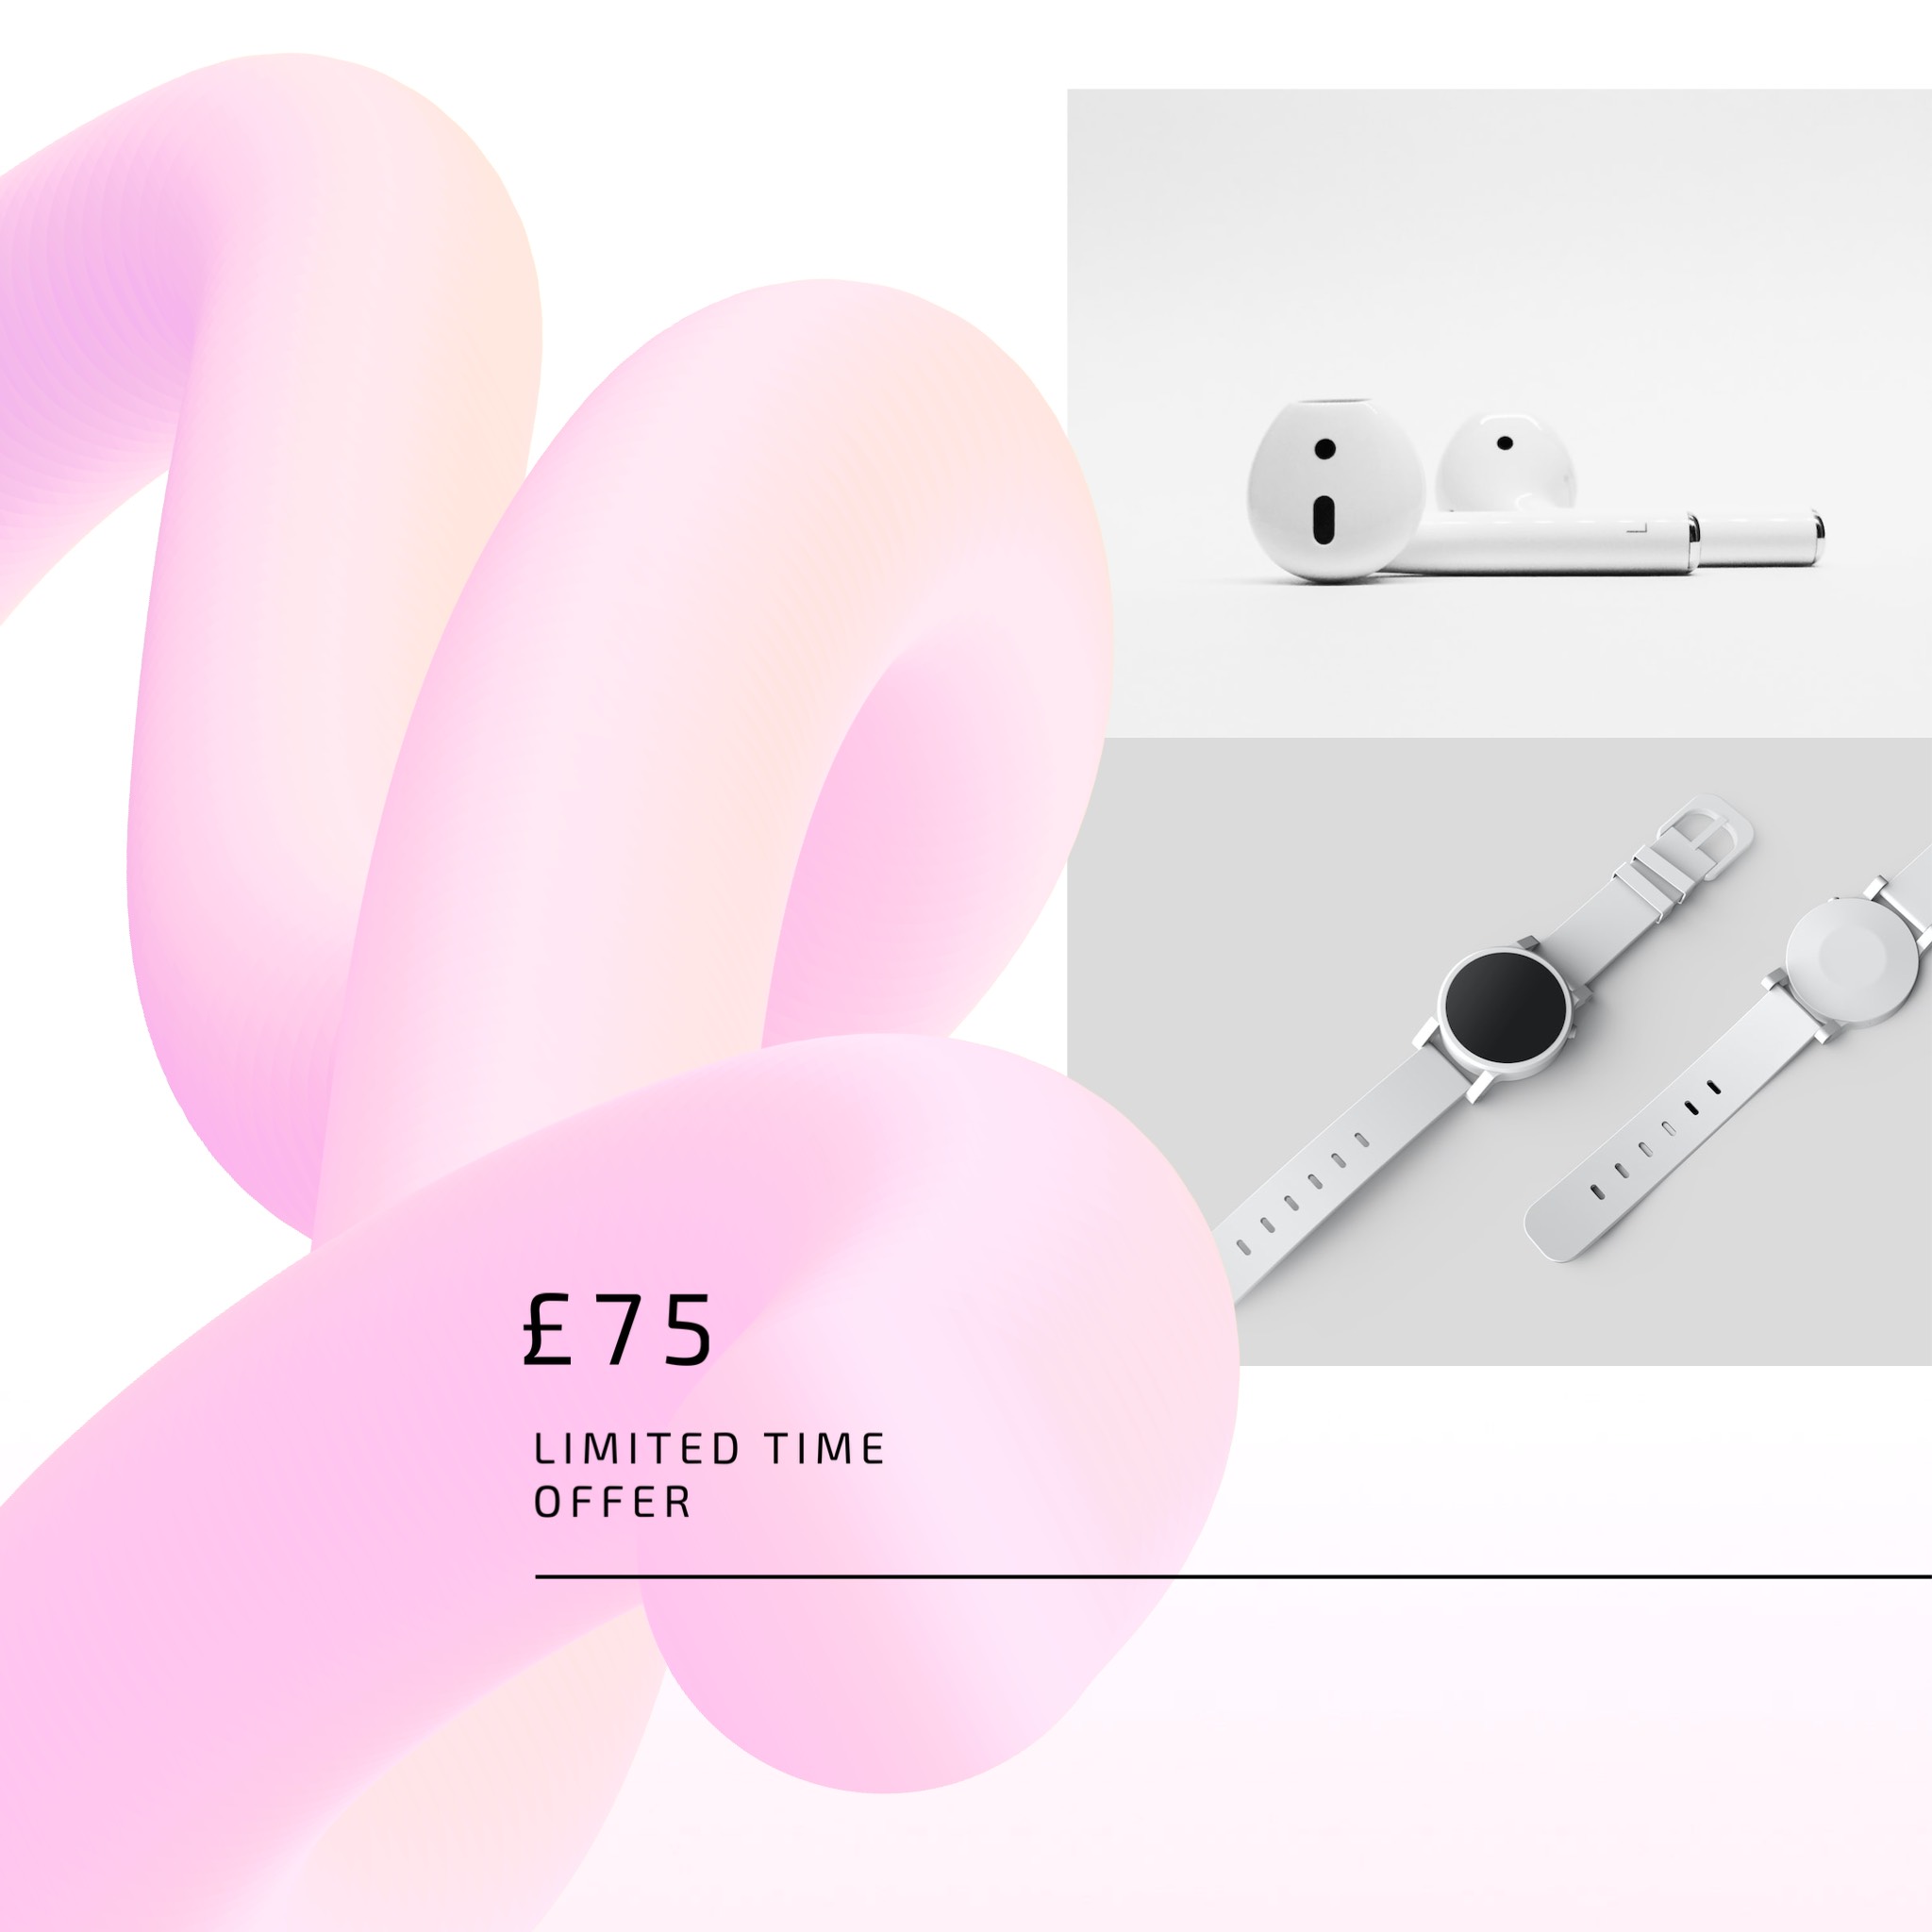 Airpods and watch limited offer Facebook Post template